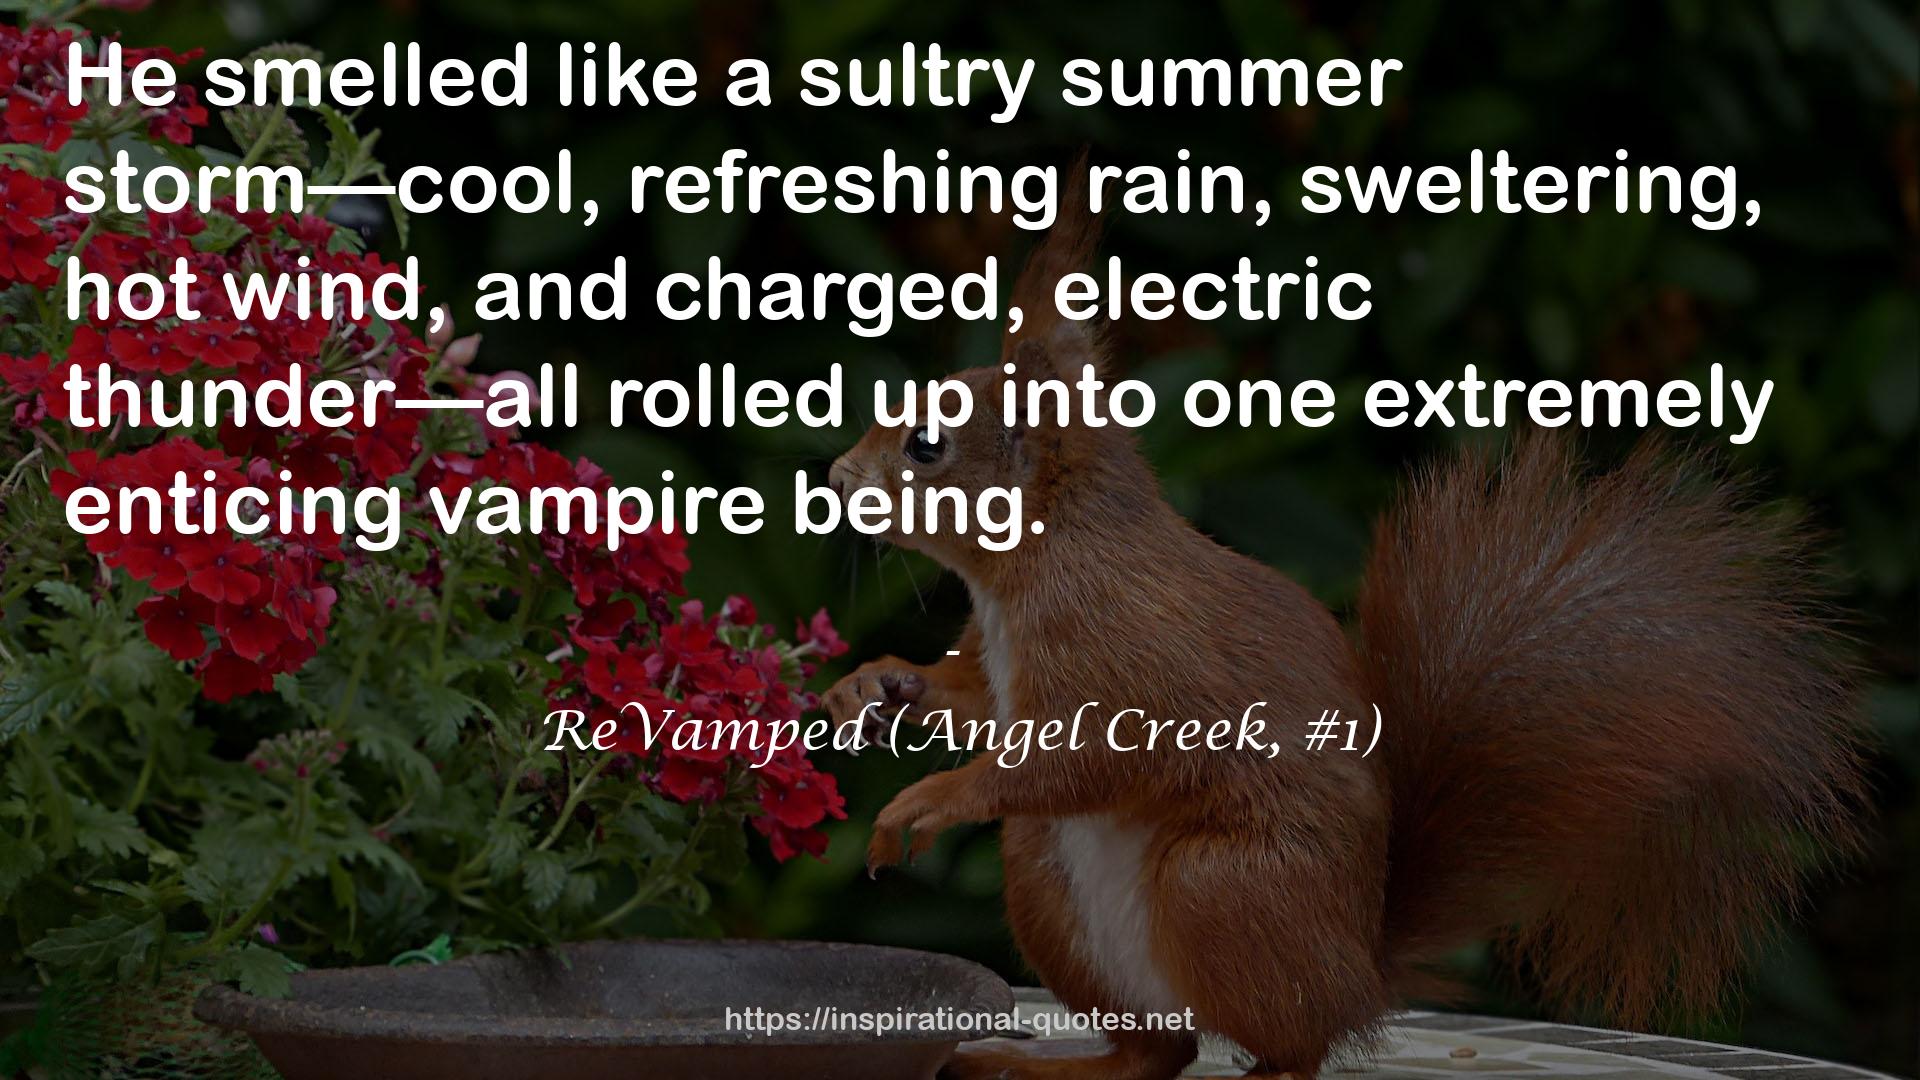 ReVamped (Angel Creek, #1) QUOTES